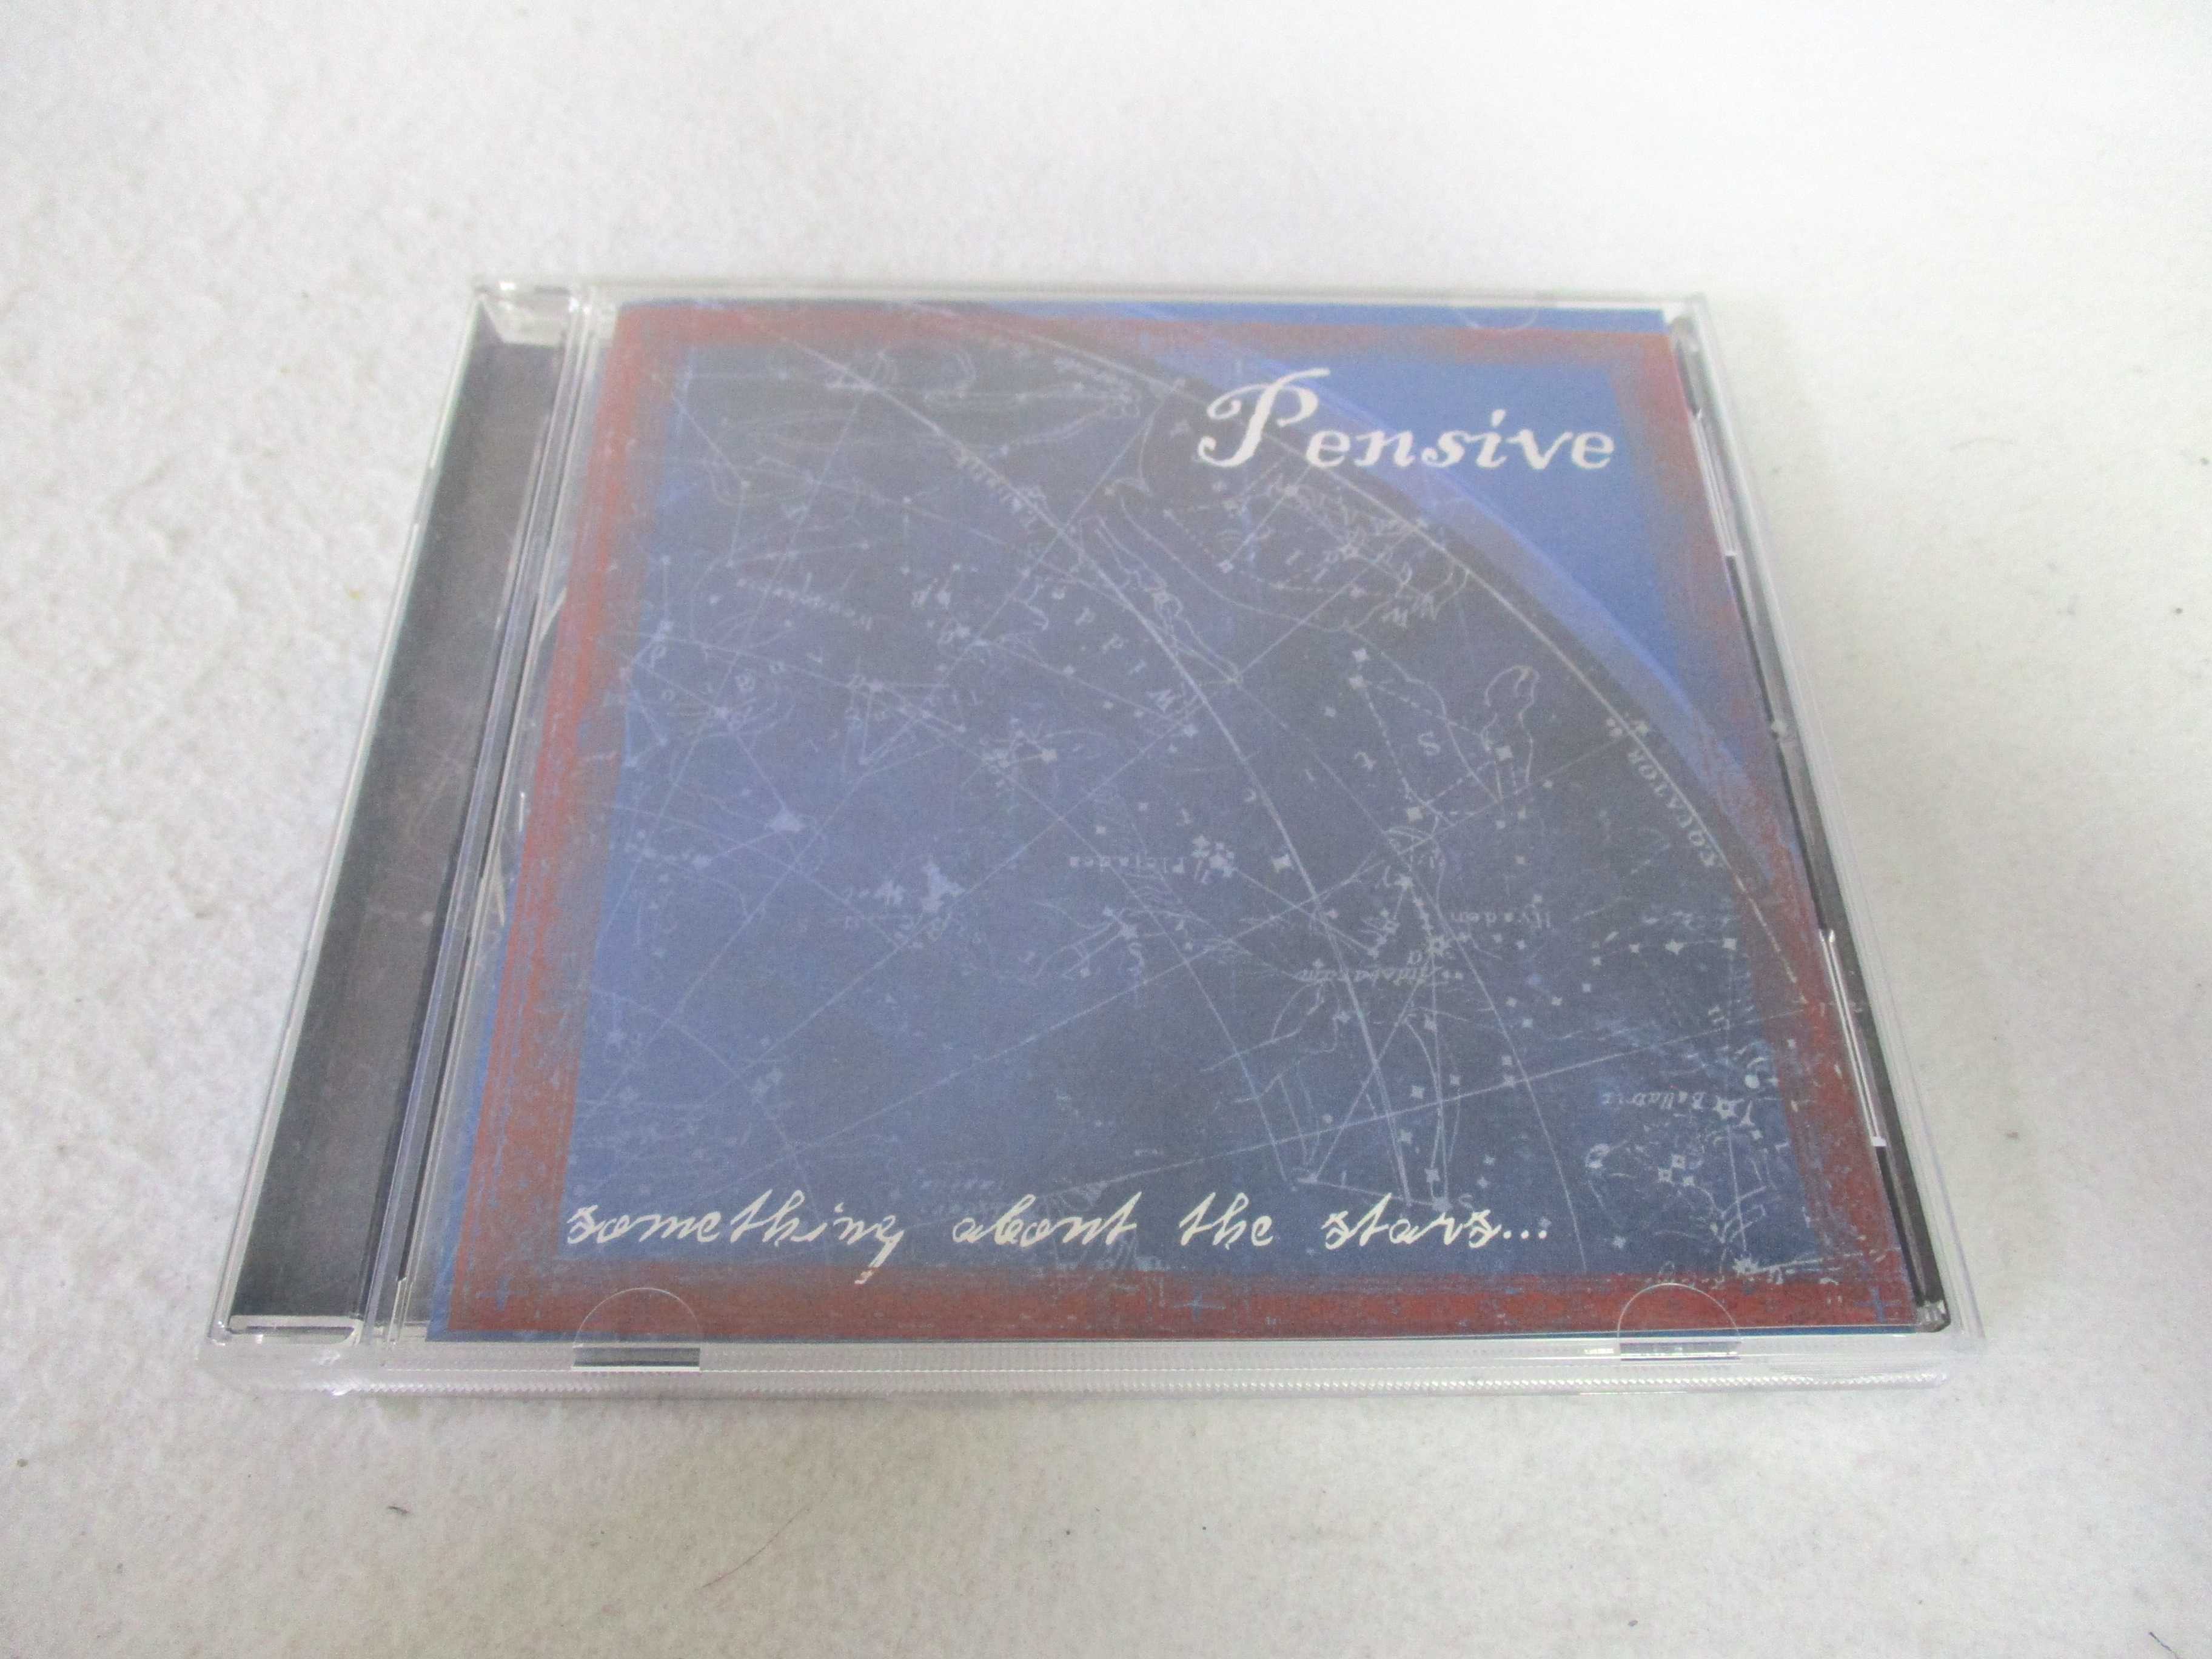 AC05461 yÁz yCDz Something About the Stars/Pensive